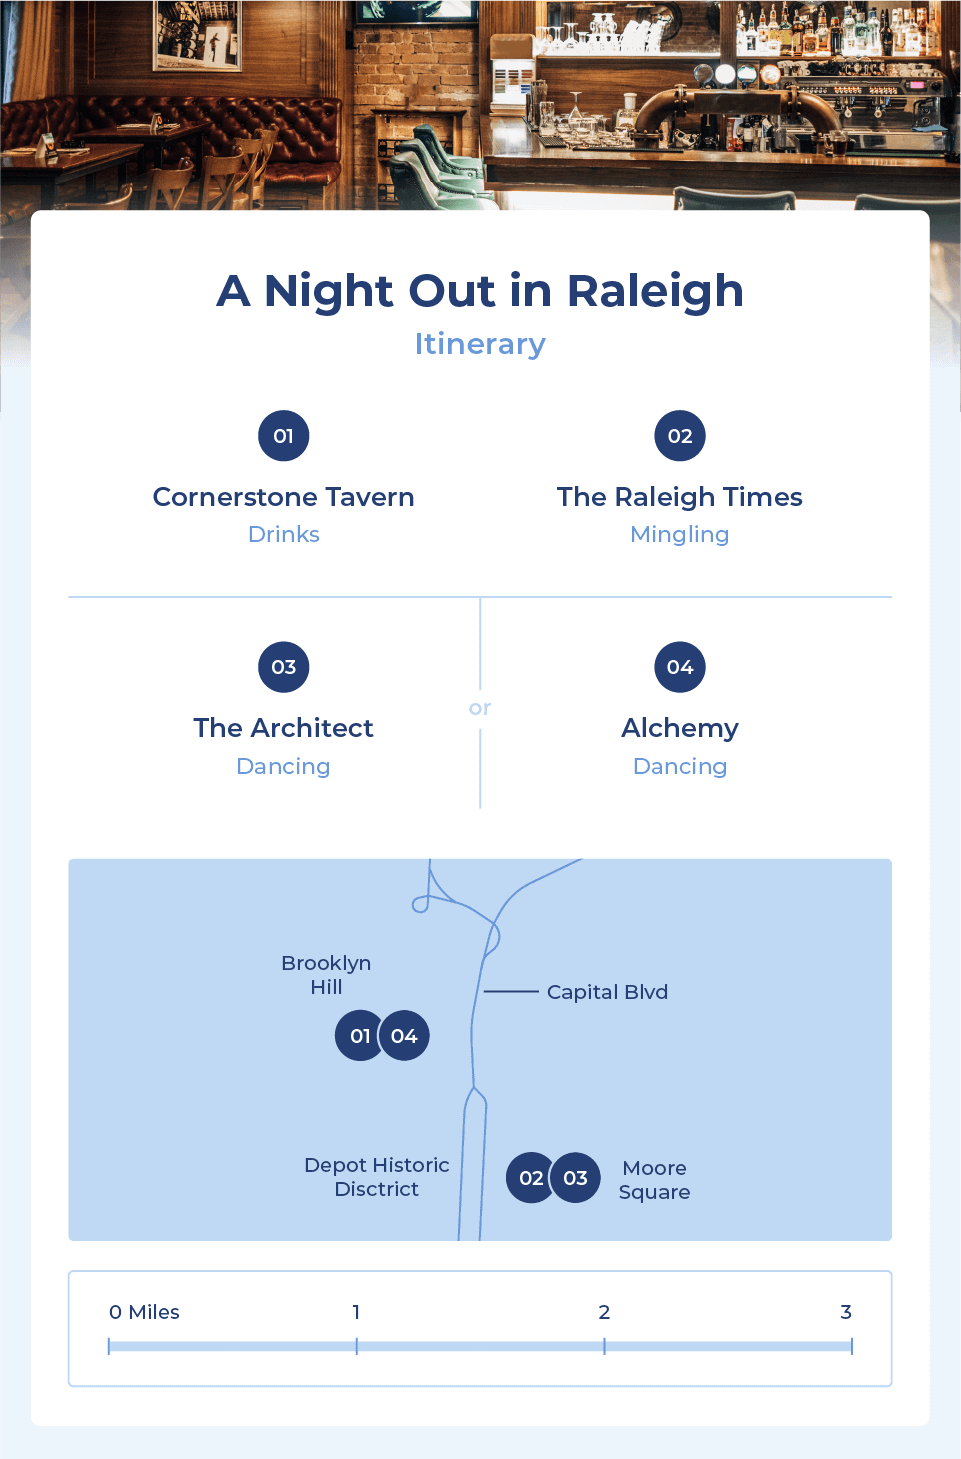 A night out in Raleigh typically starts at the Cornerstone Tavern for drinks, then goes to The Raleigh Times for mingling, then ends at The Architect or Alchemy for dancing.